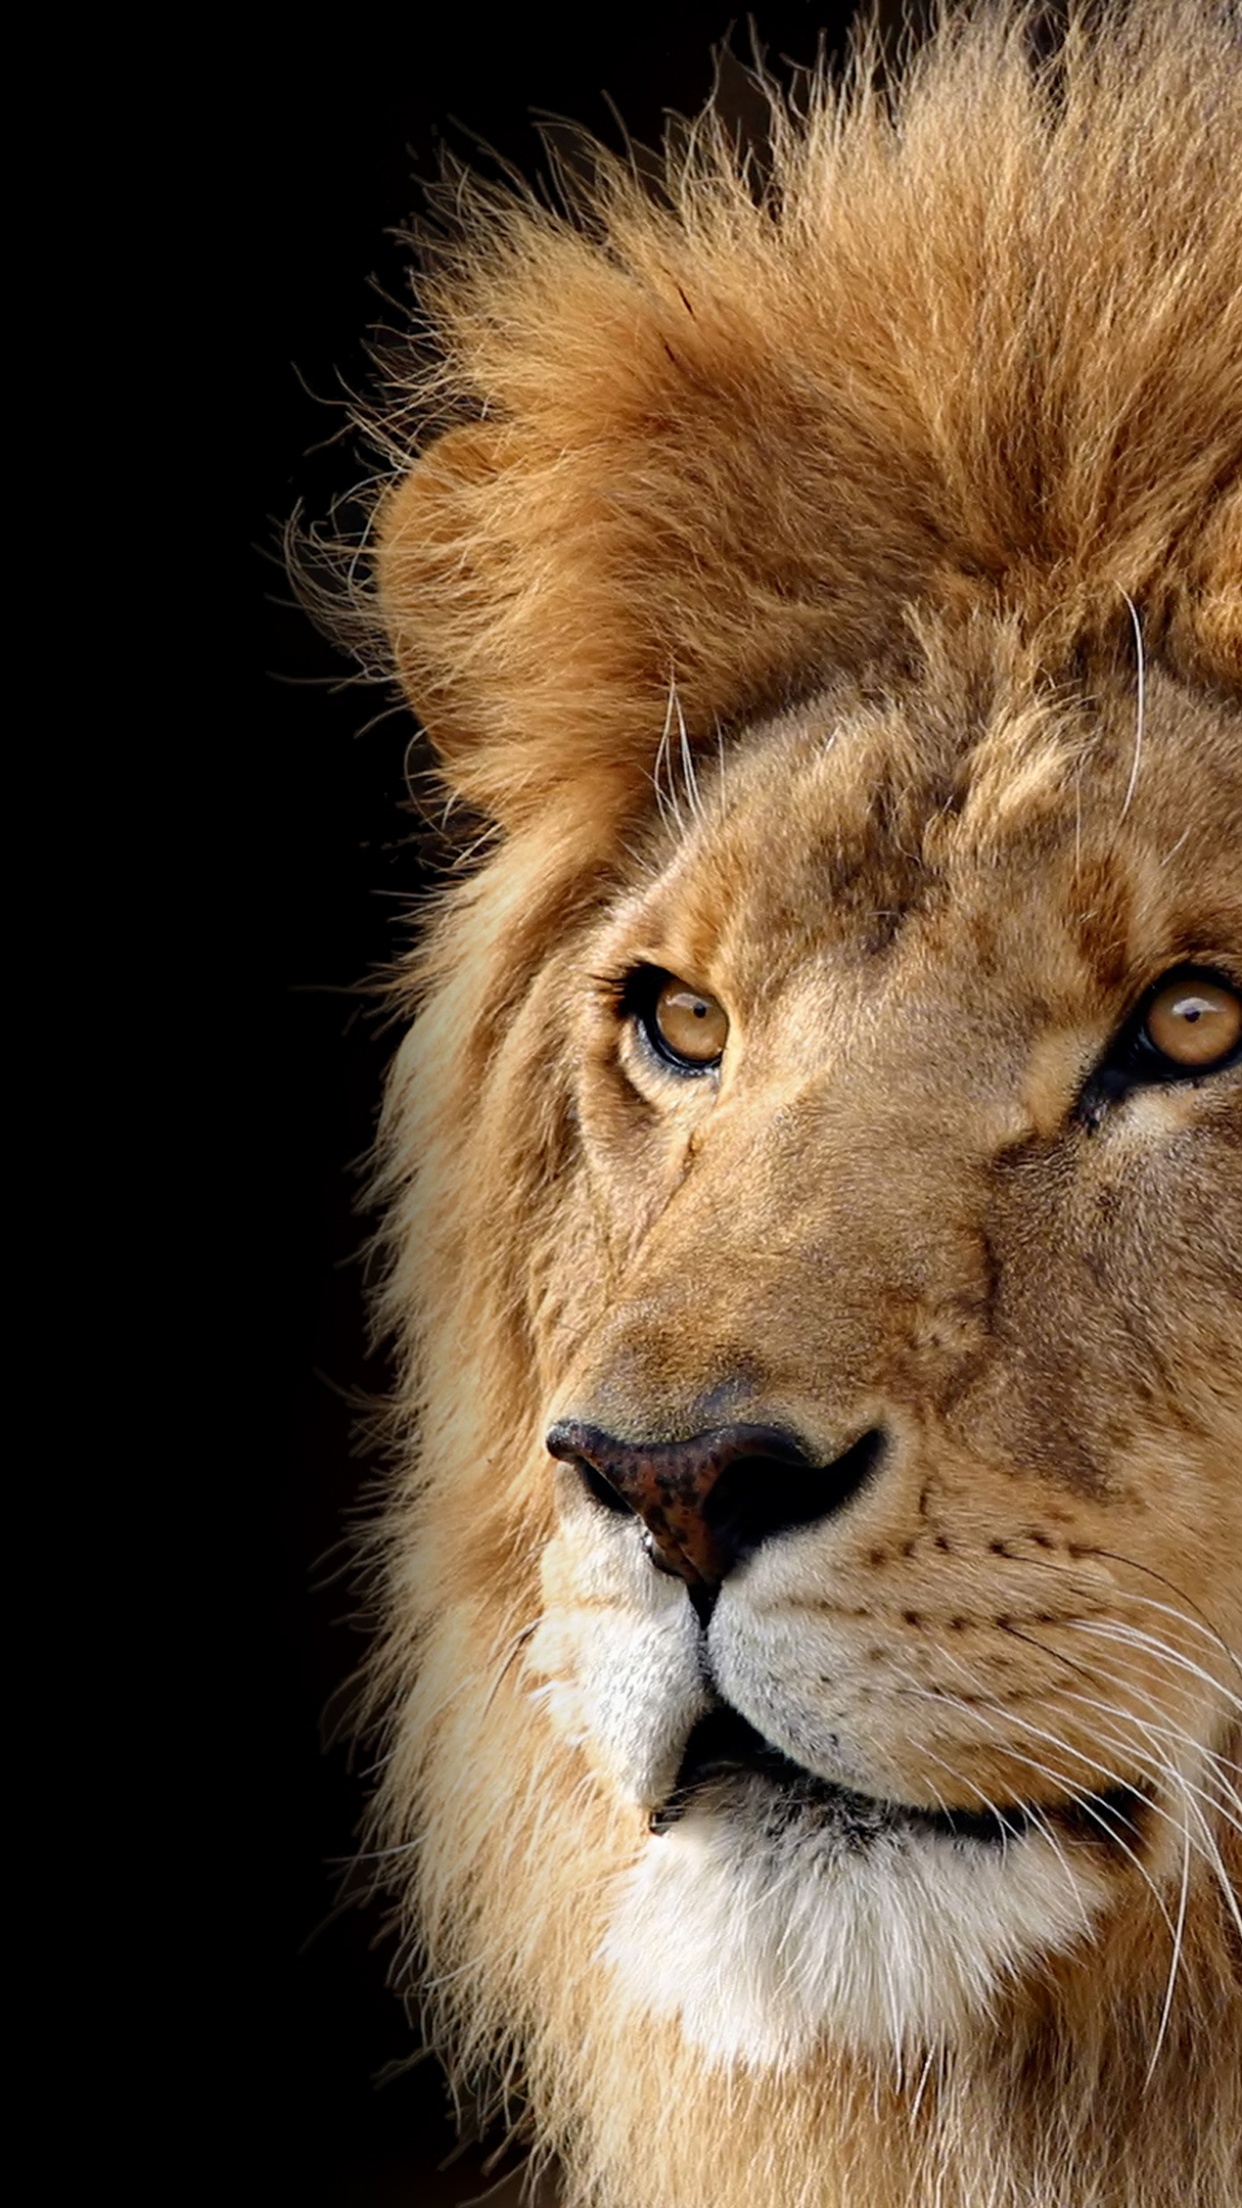 Live wallpaper Lion in the wind DOWNLOAD